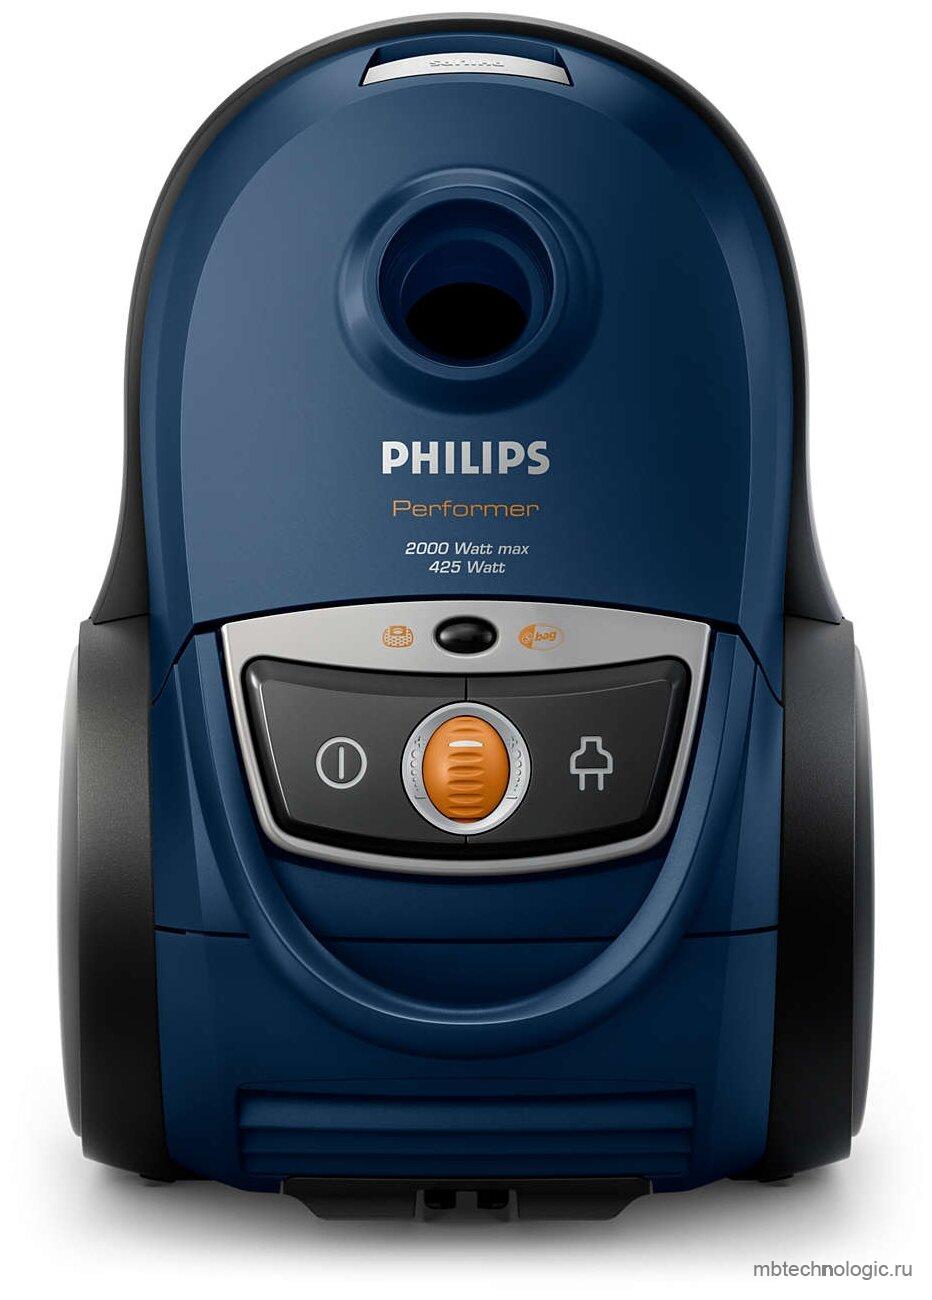 Philips FC9150/01 Performer